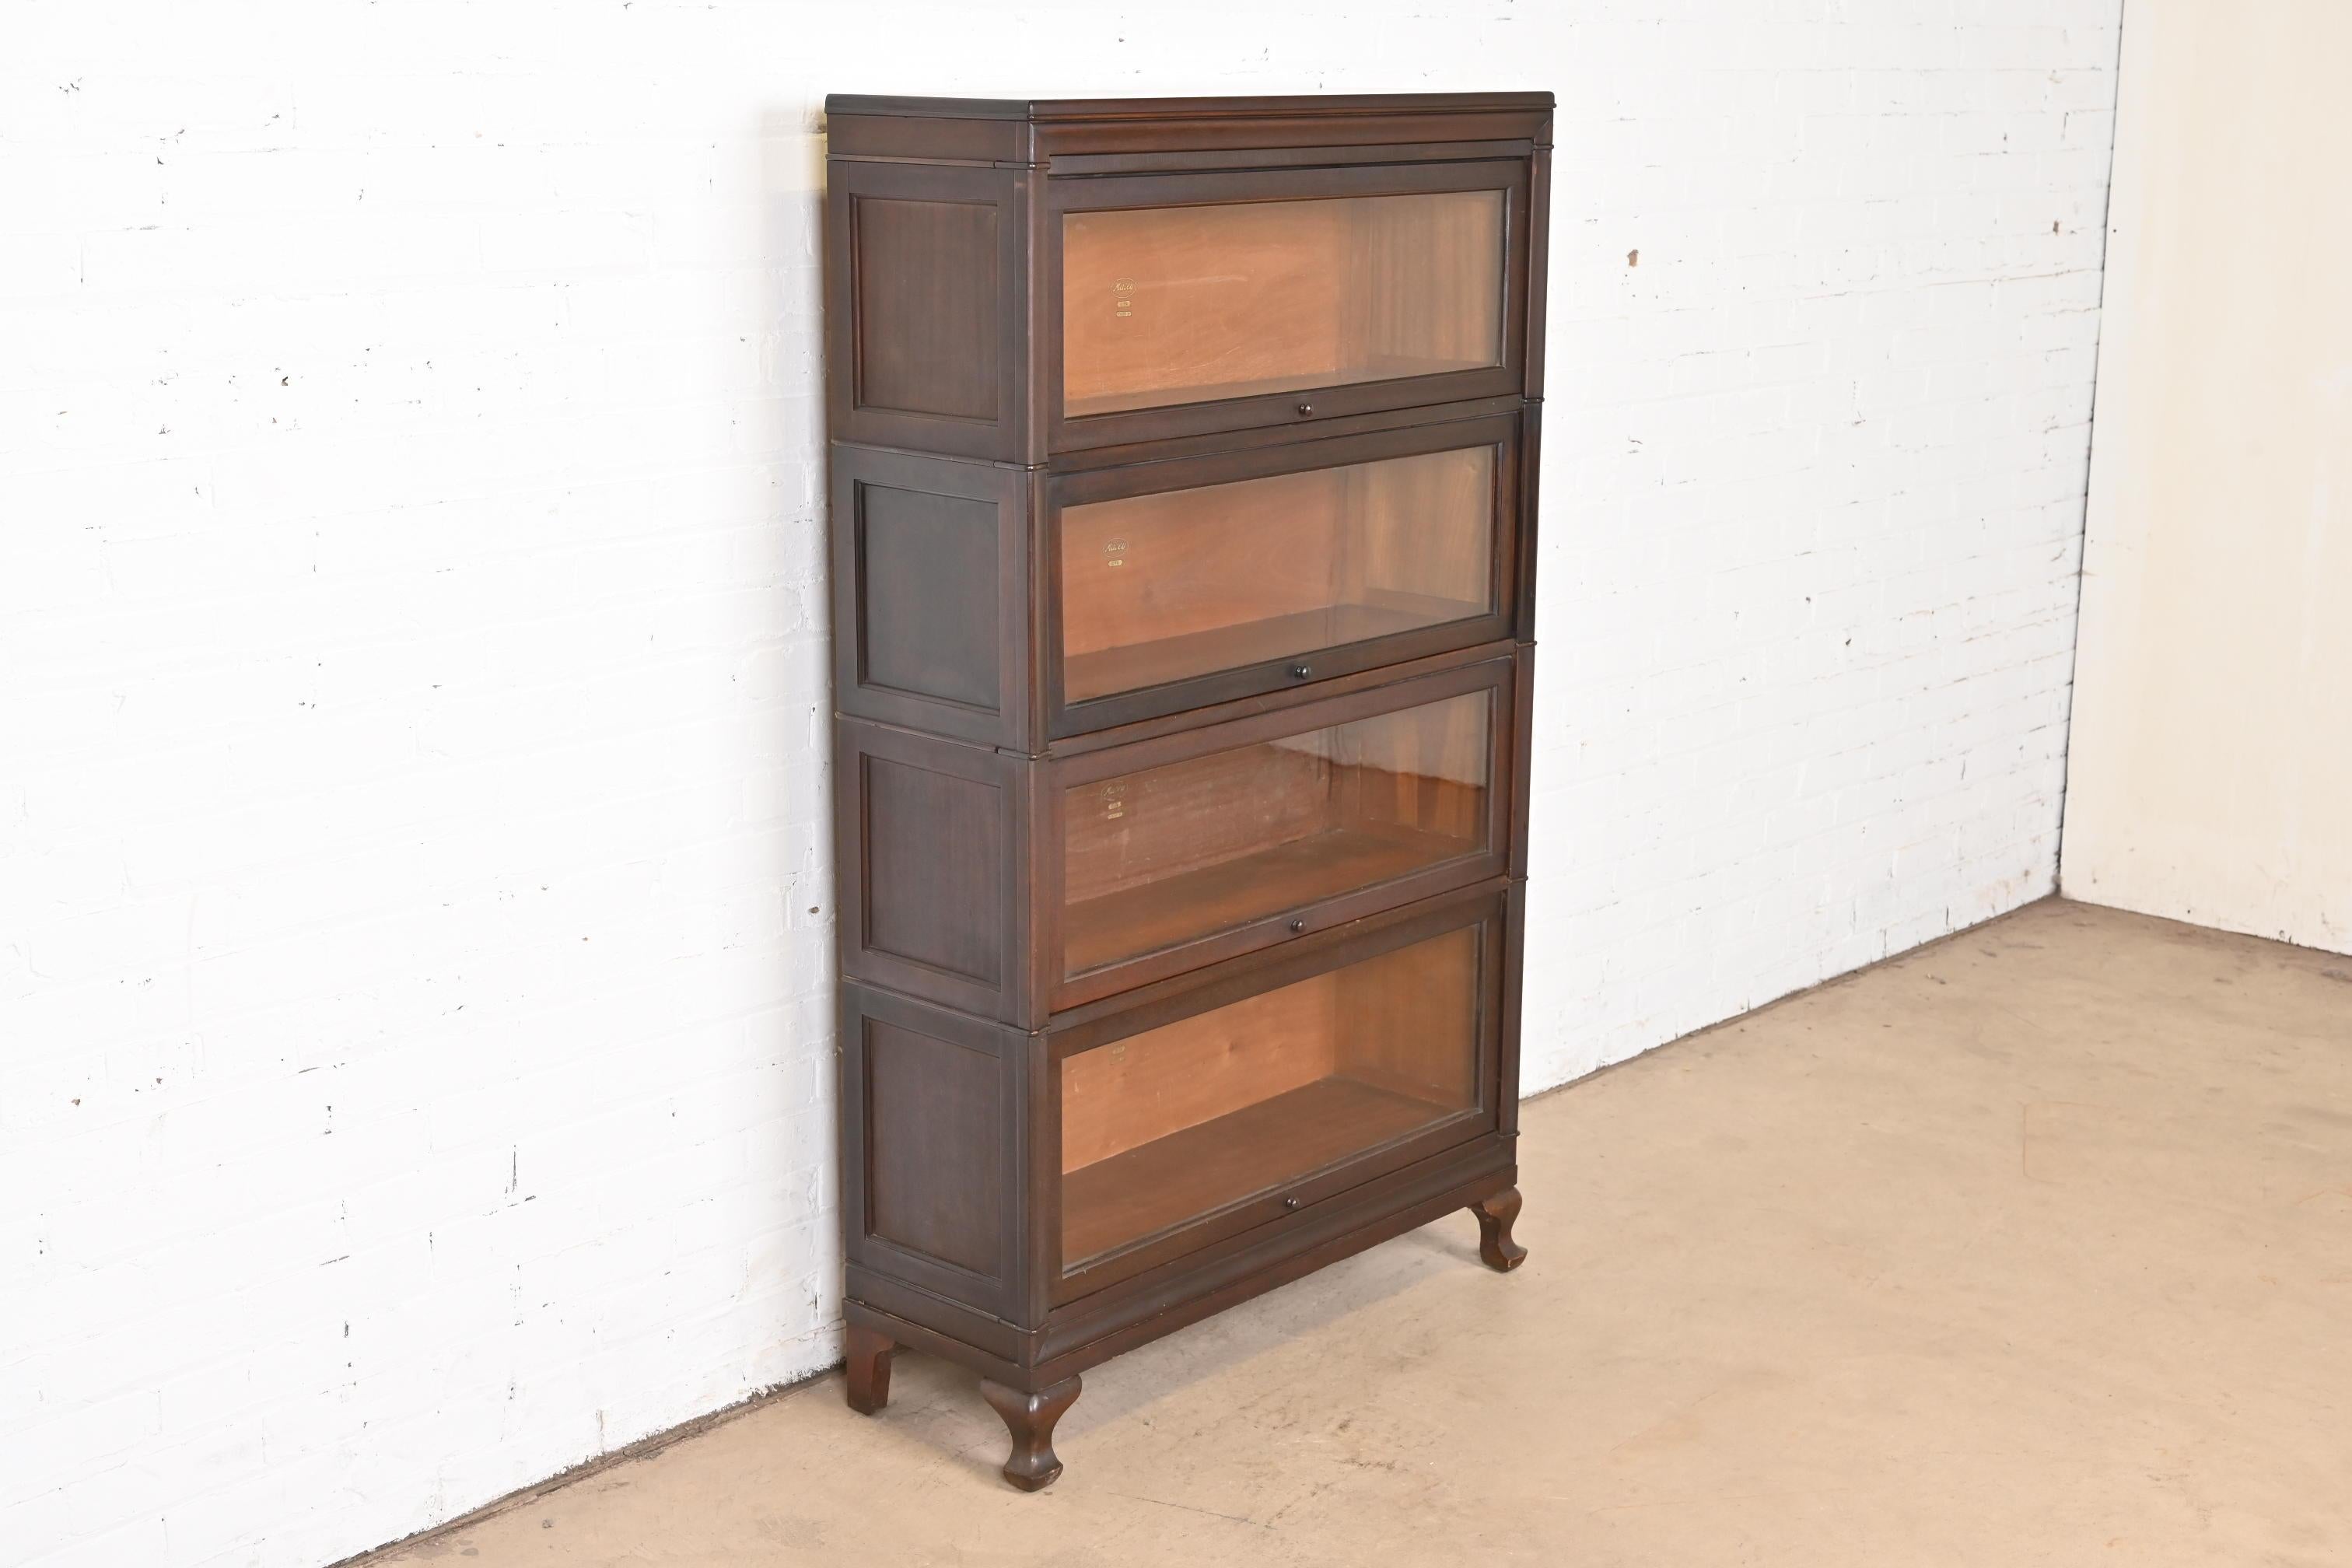 American Antique Arts & Crafts Mahogany Four-Stack Barrister Bookcase by Macey, 1920s For Sale